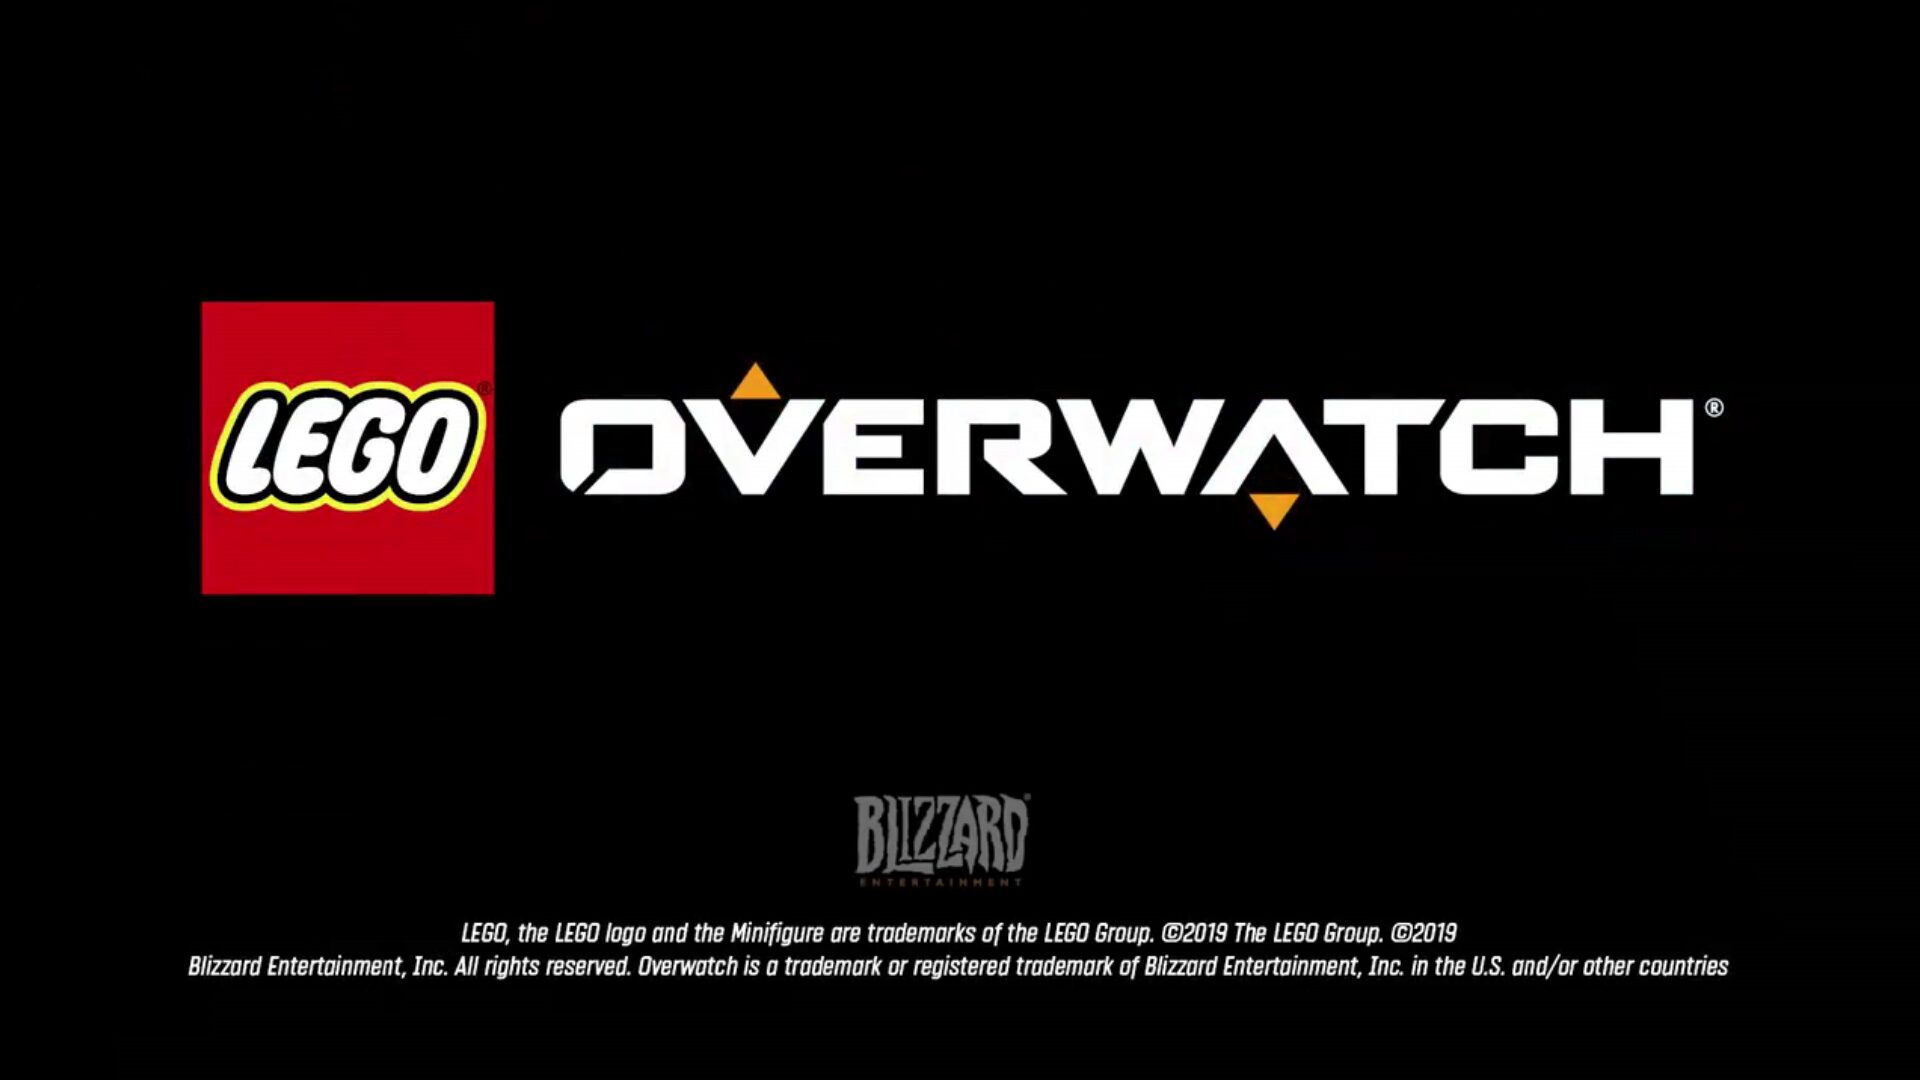 Overwatch Lego Sets Coming Soon